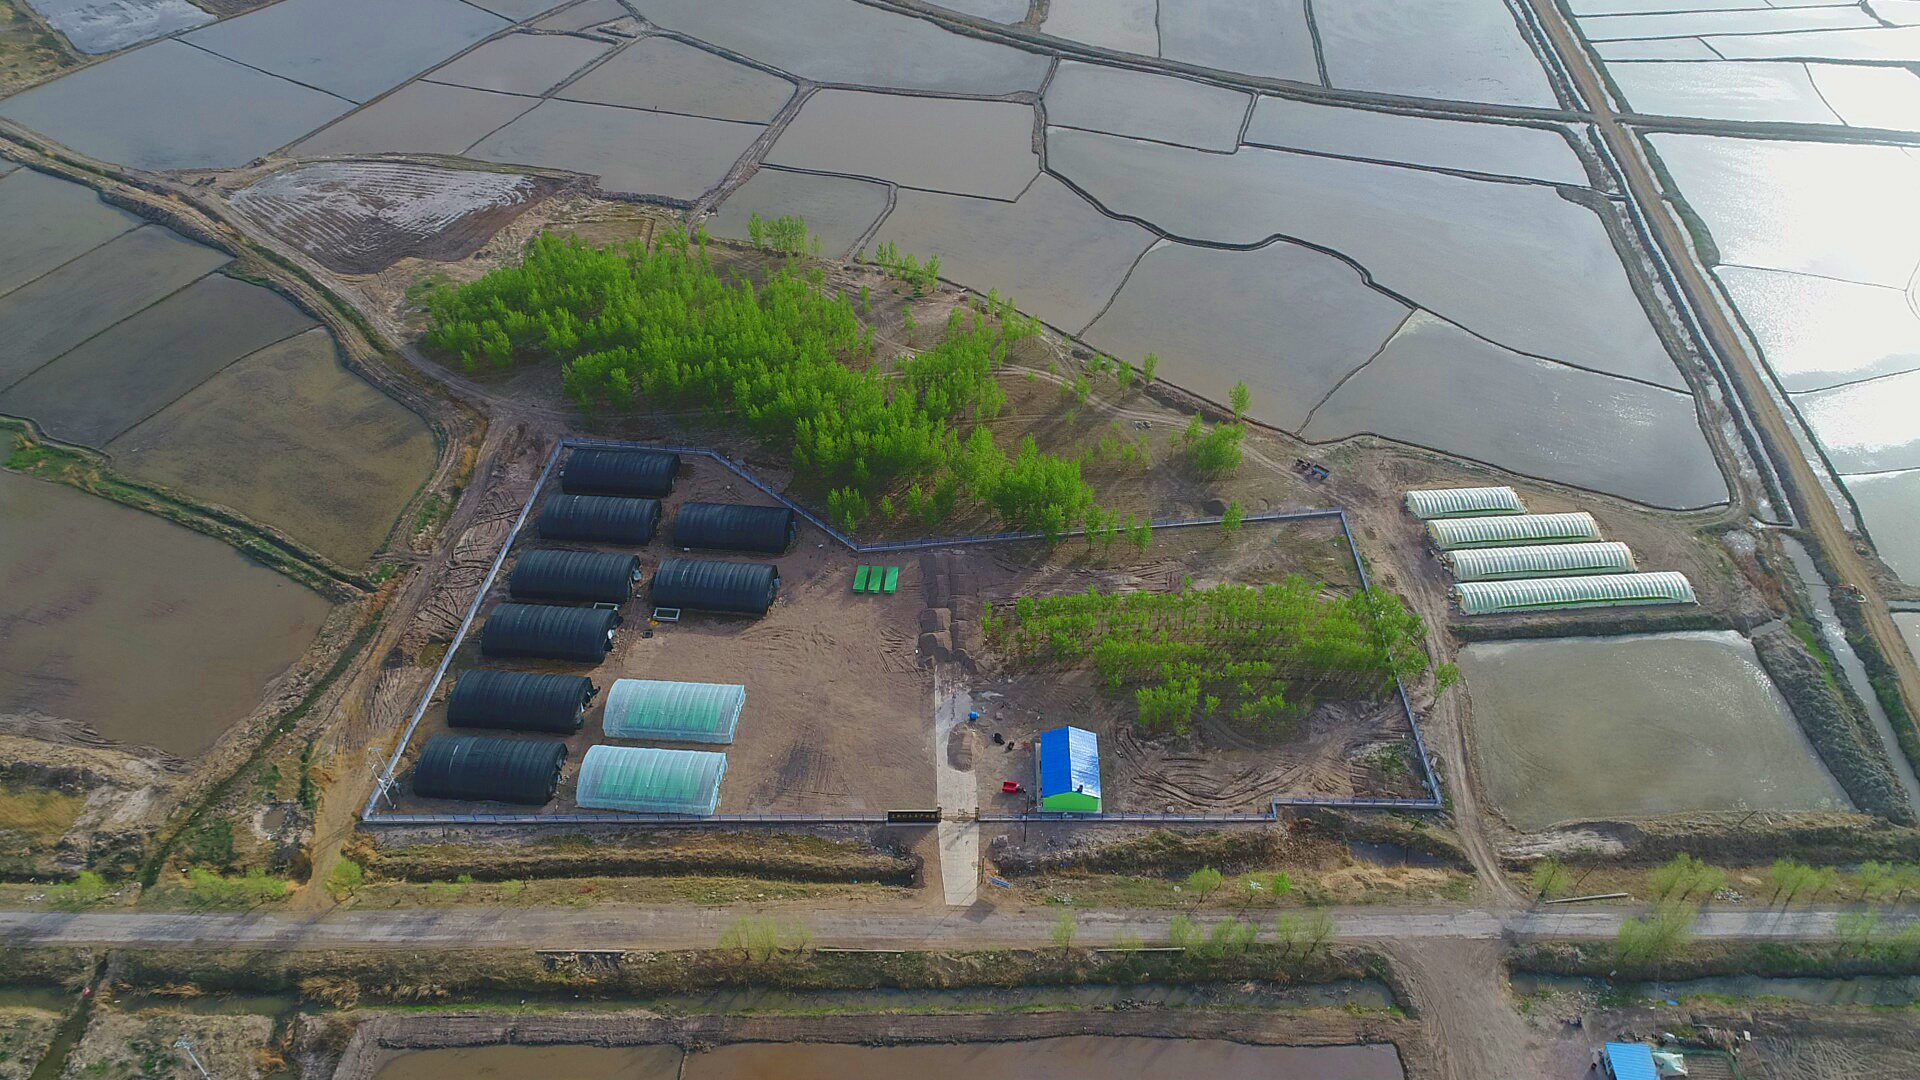 An aerial view of greenhouses for cultivating black fungus in Lixin village, northeast China’s Jilin province [Photo: China Plus]